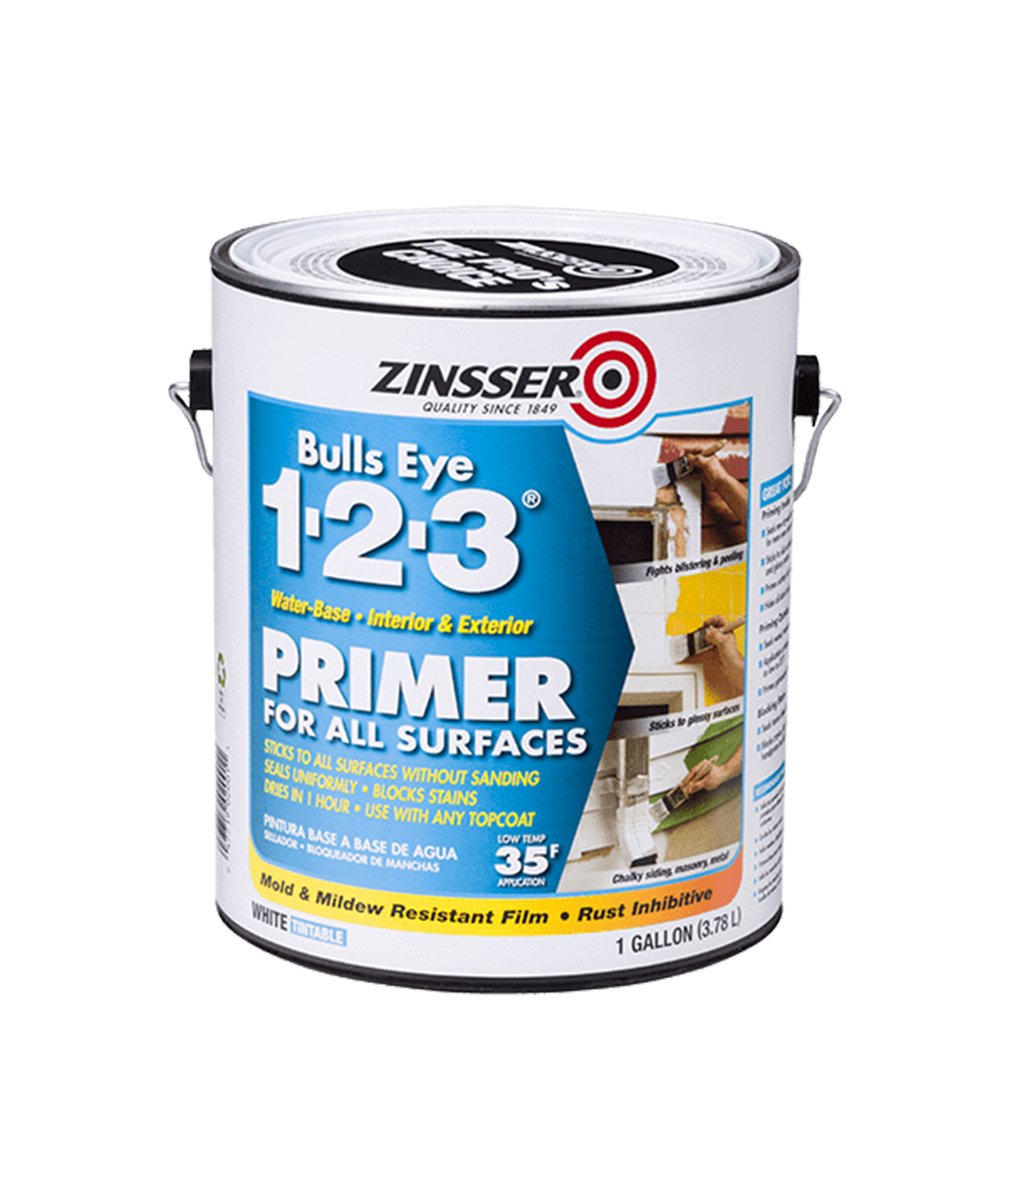 Gallon of Zinsser Bullseye 1-2-3 Primer, available at Wallauer's in NY.